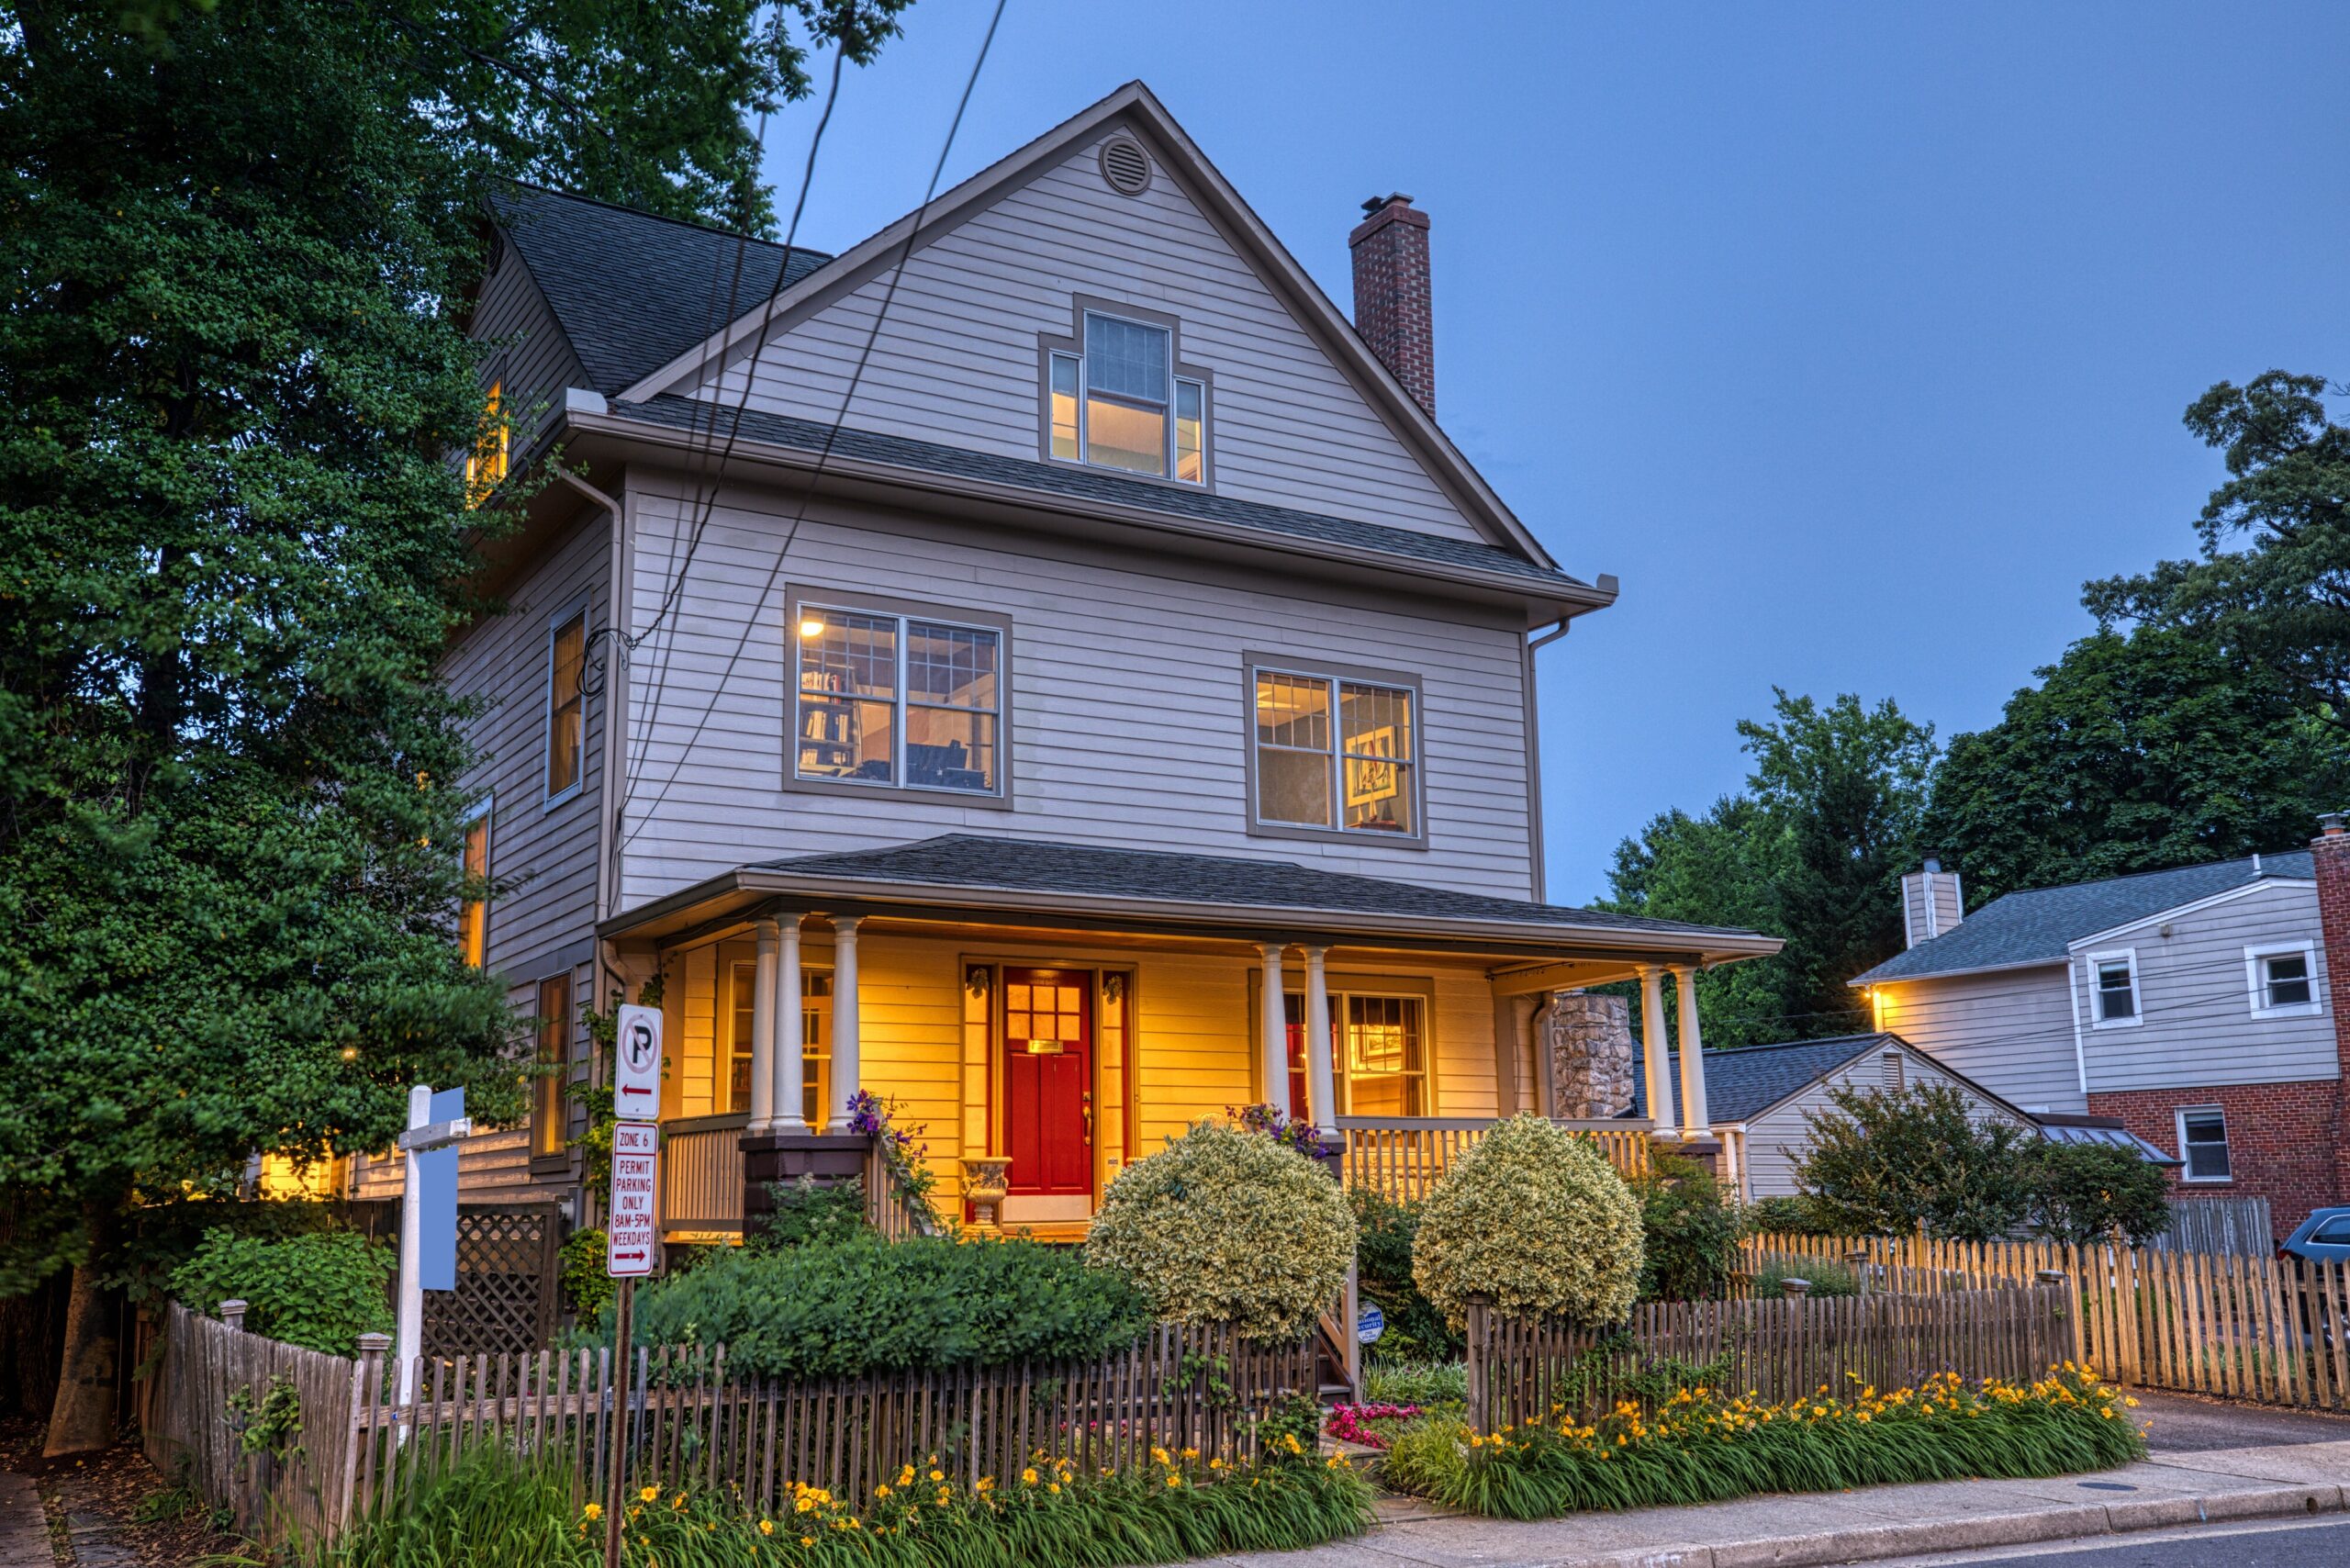 Professional exterior photo taken at dusk of 819 N Fillmore St - Showing the front of the home at the left angle